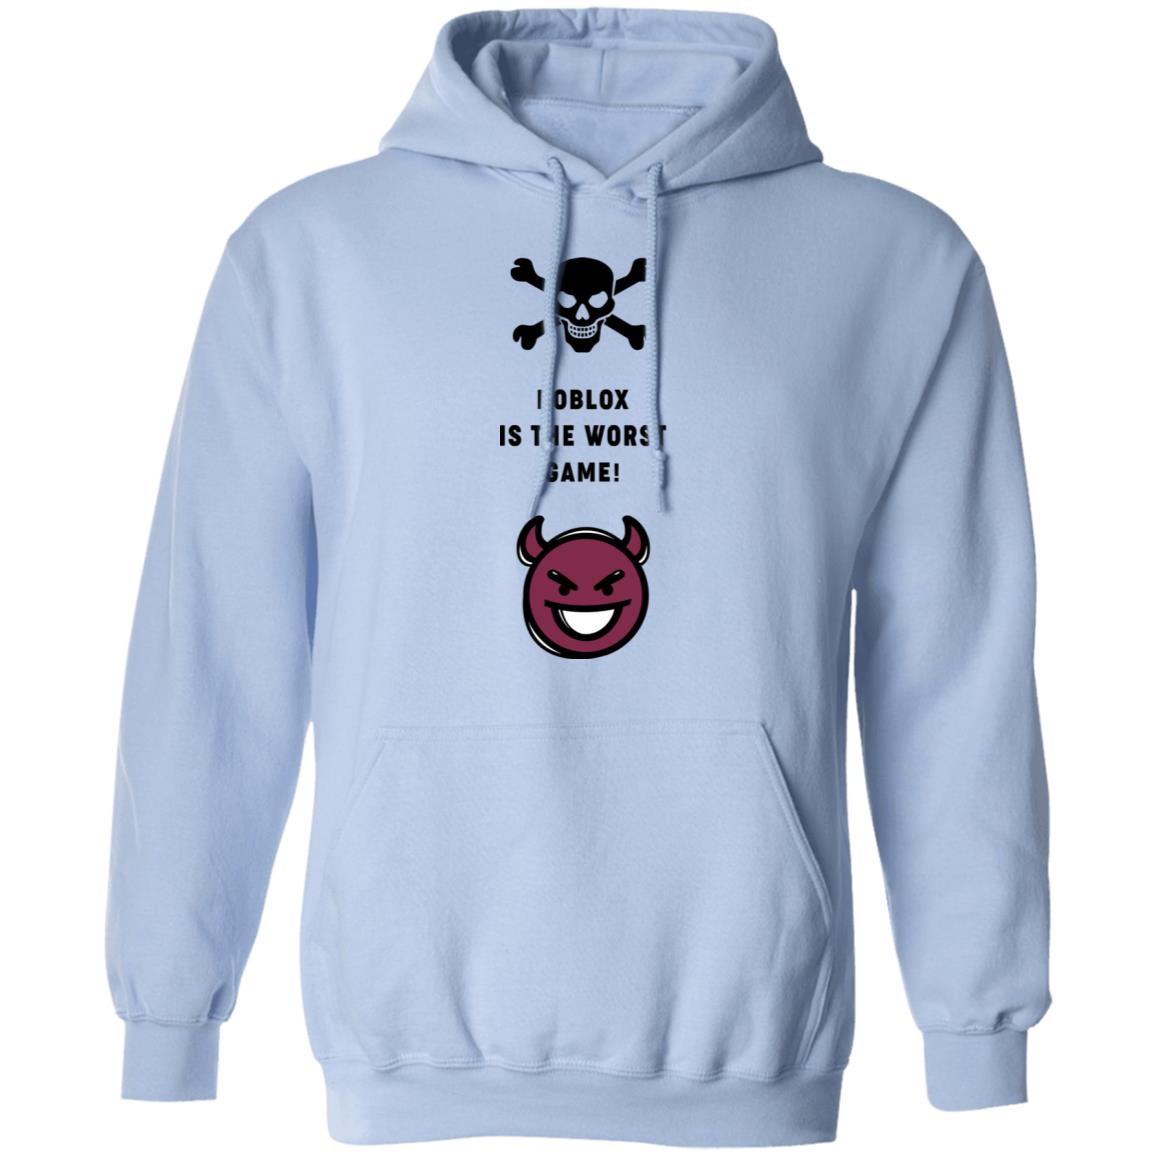 Roblox Is The Worst Game Funny Roblox T Shirts Hoodies Long Sleeve - roblox garfield shirt